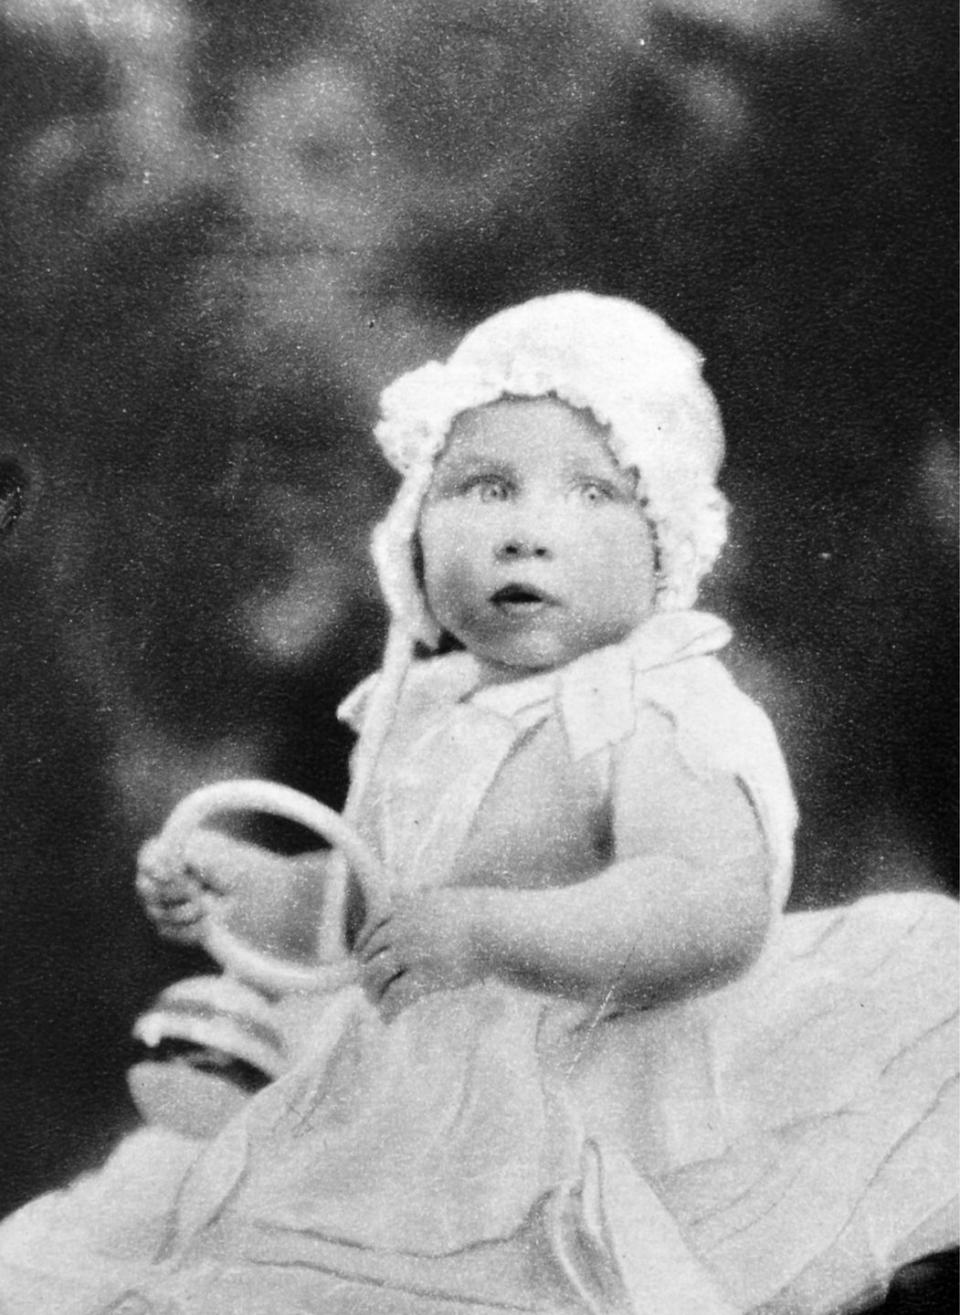 the young princess margret sister of queen elizabeth ii